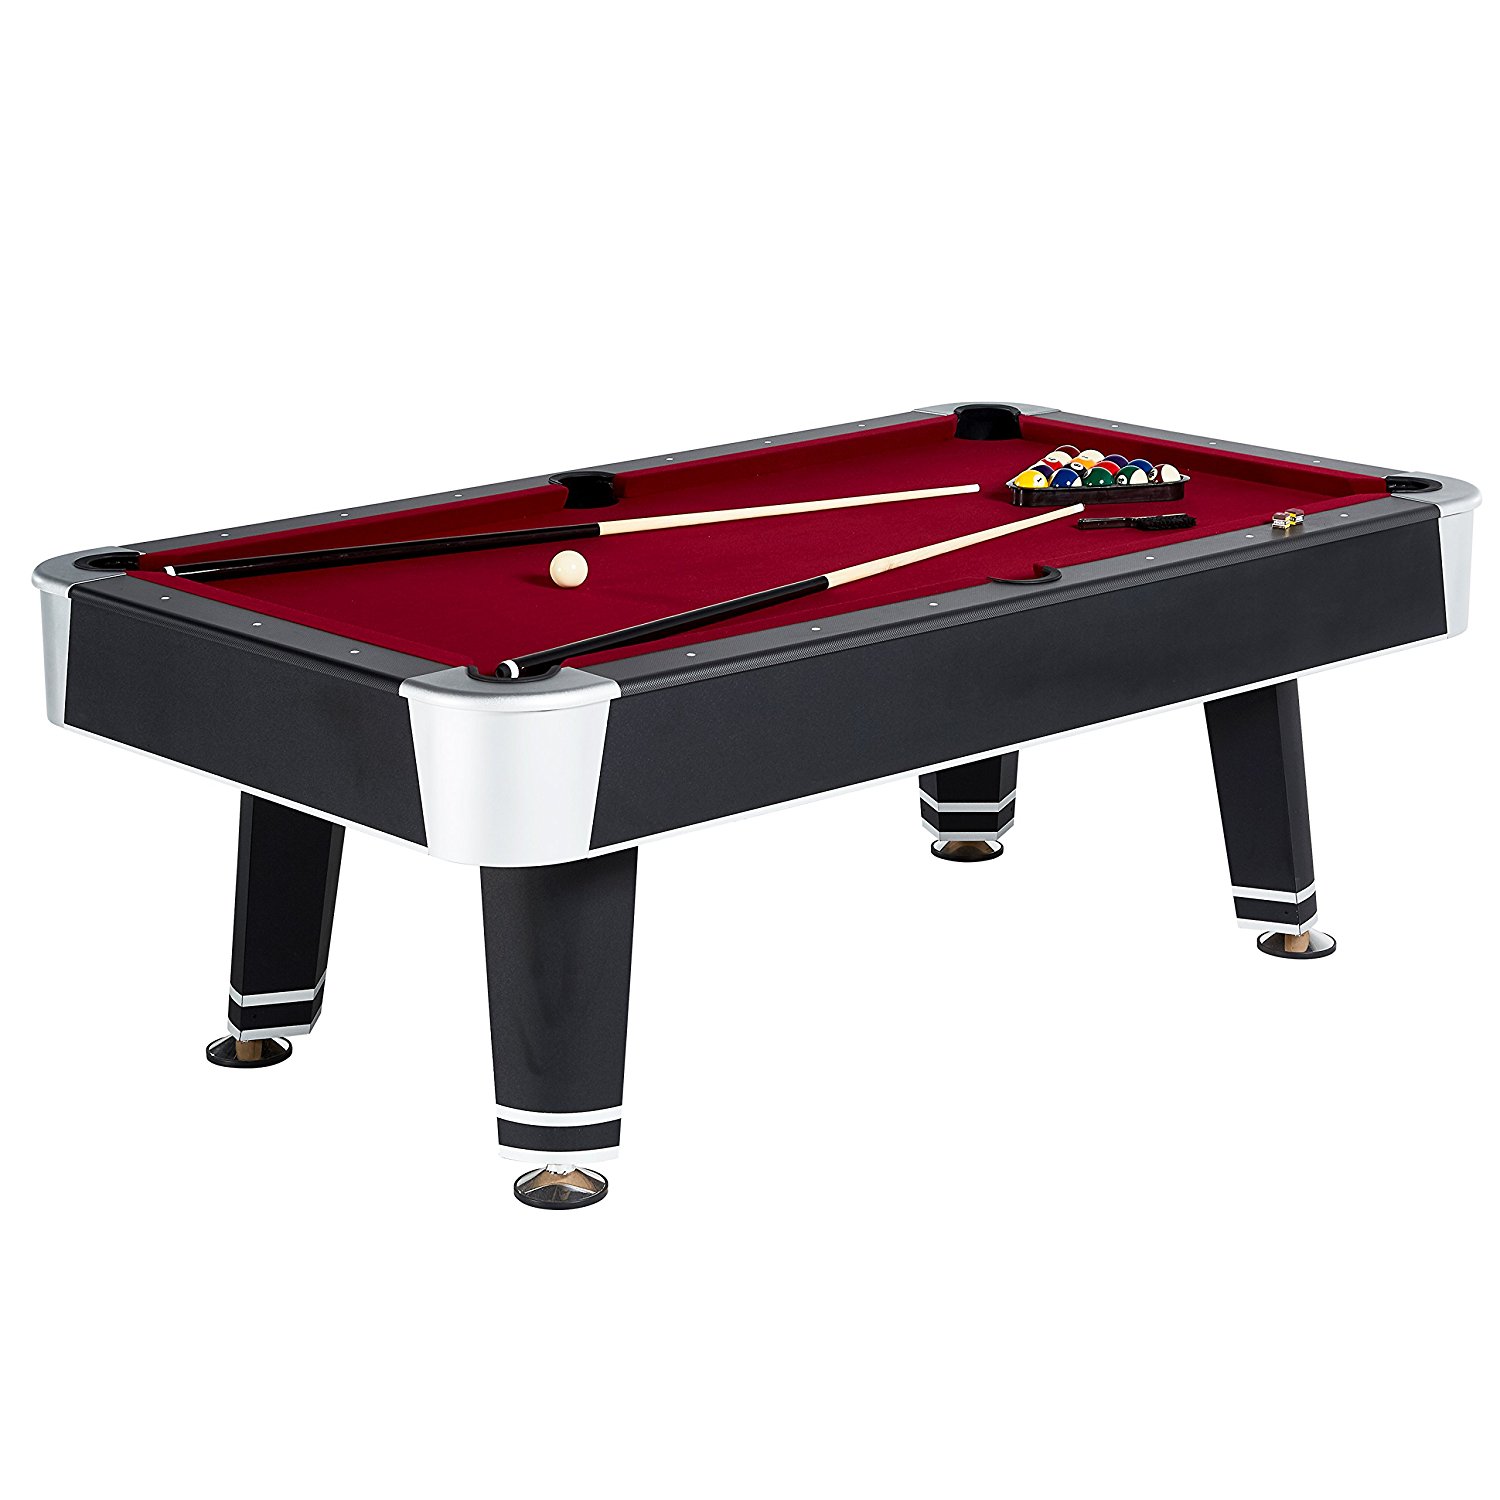 MD Sports 84 in. Arcade Billiard Table - Outdoor Pool Table